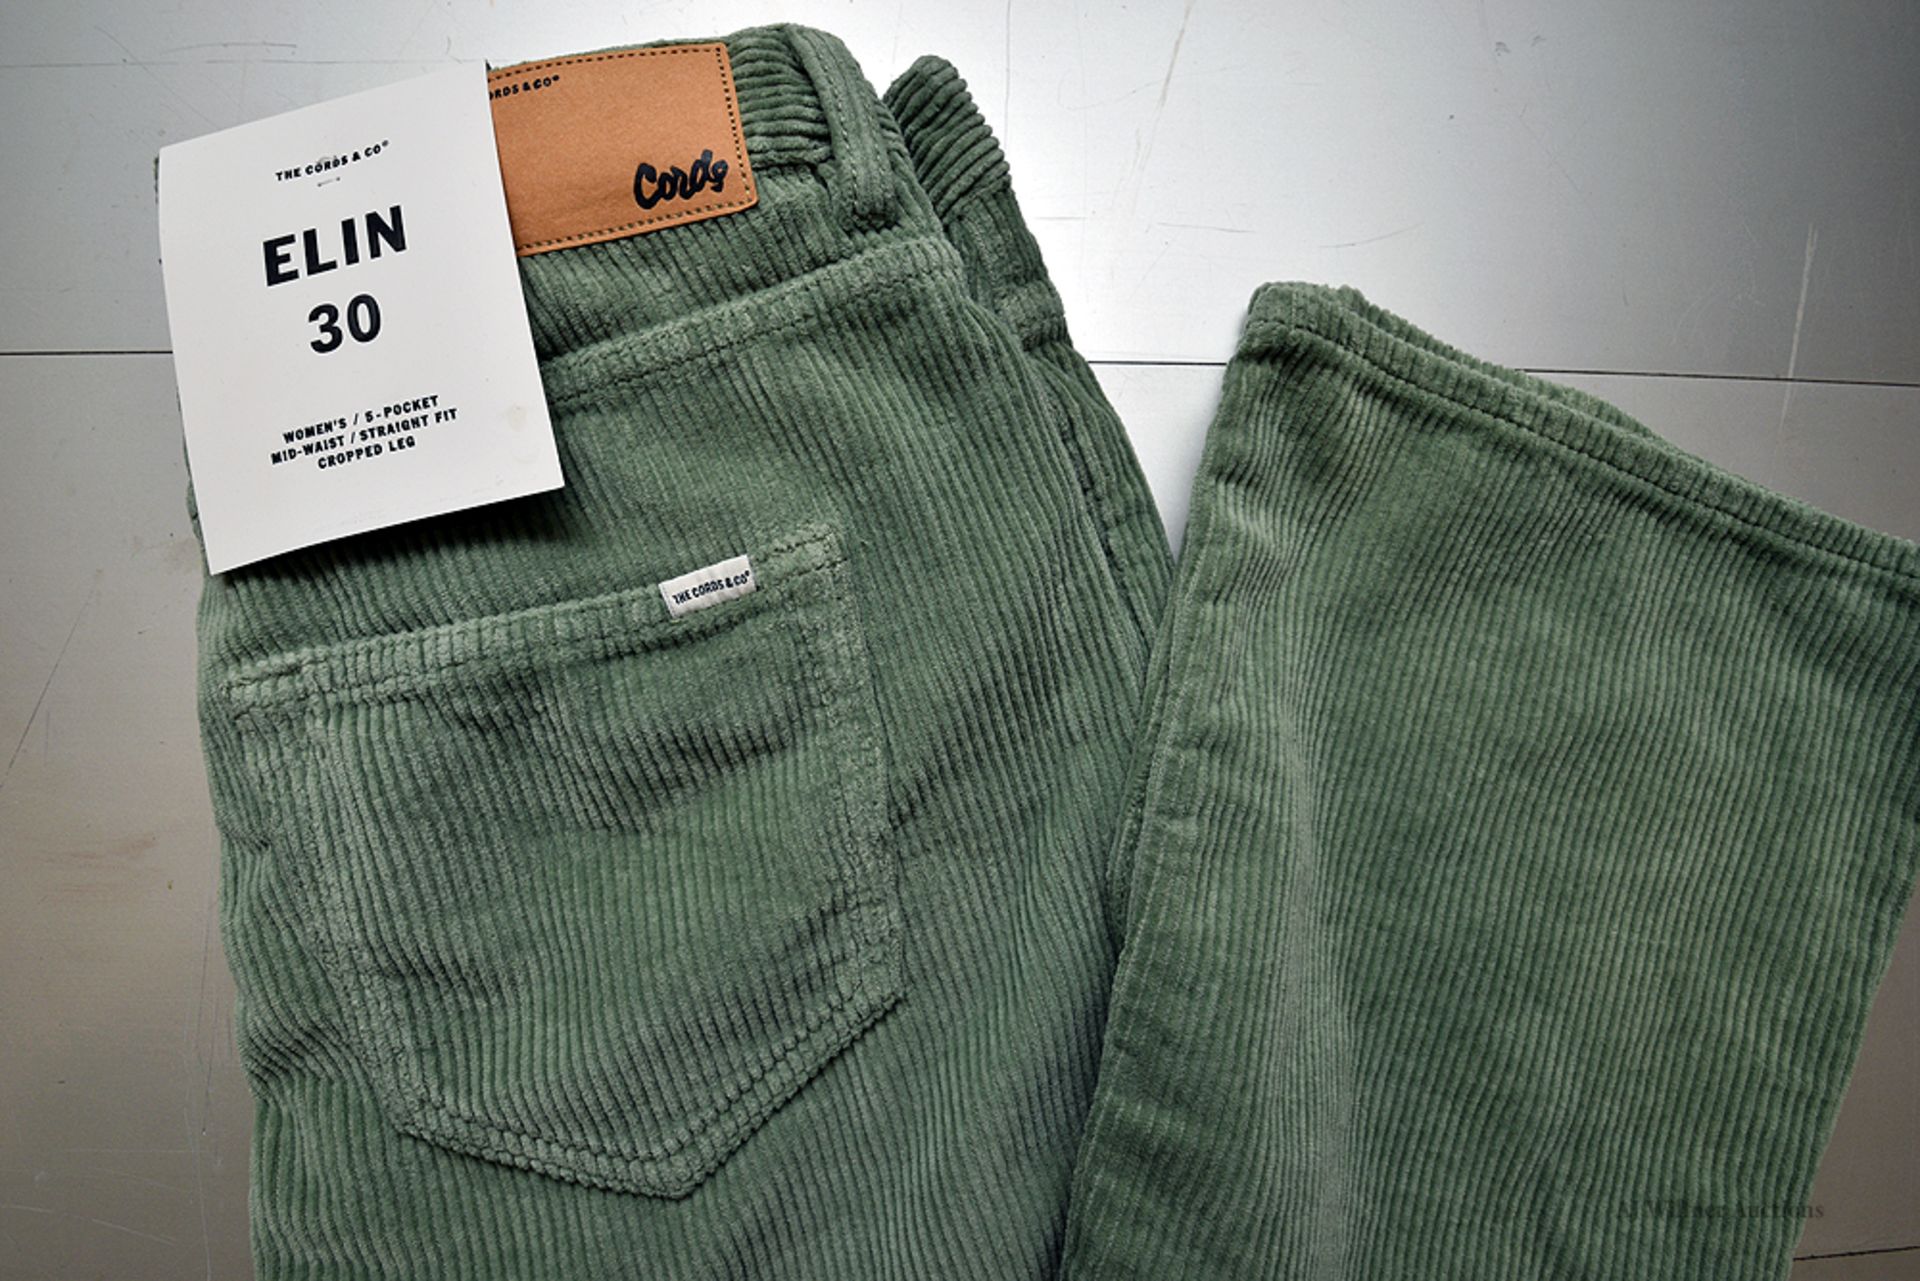 The Cords & Co. "Elin" Style, Women's/ 5-Pocket/ Mid-Waist/ Straight Fit/ Cropped Leg Pants - Image 3 of 6